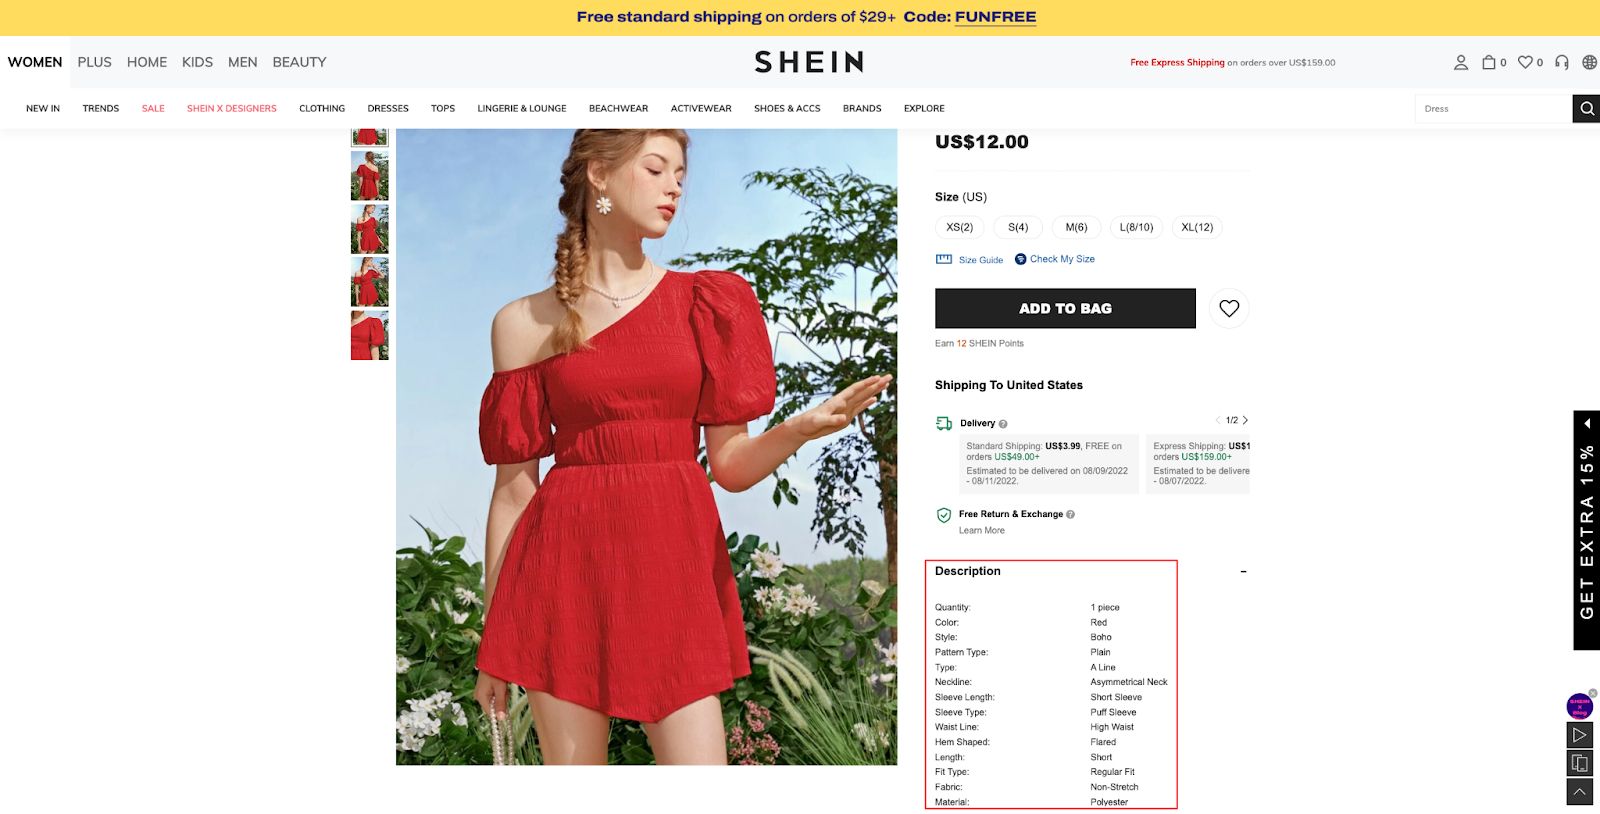 SHEIN CURVE - Standout styles that you'll wonder how you